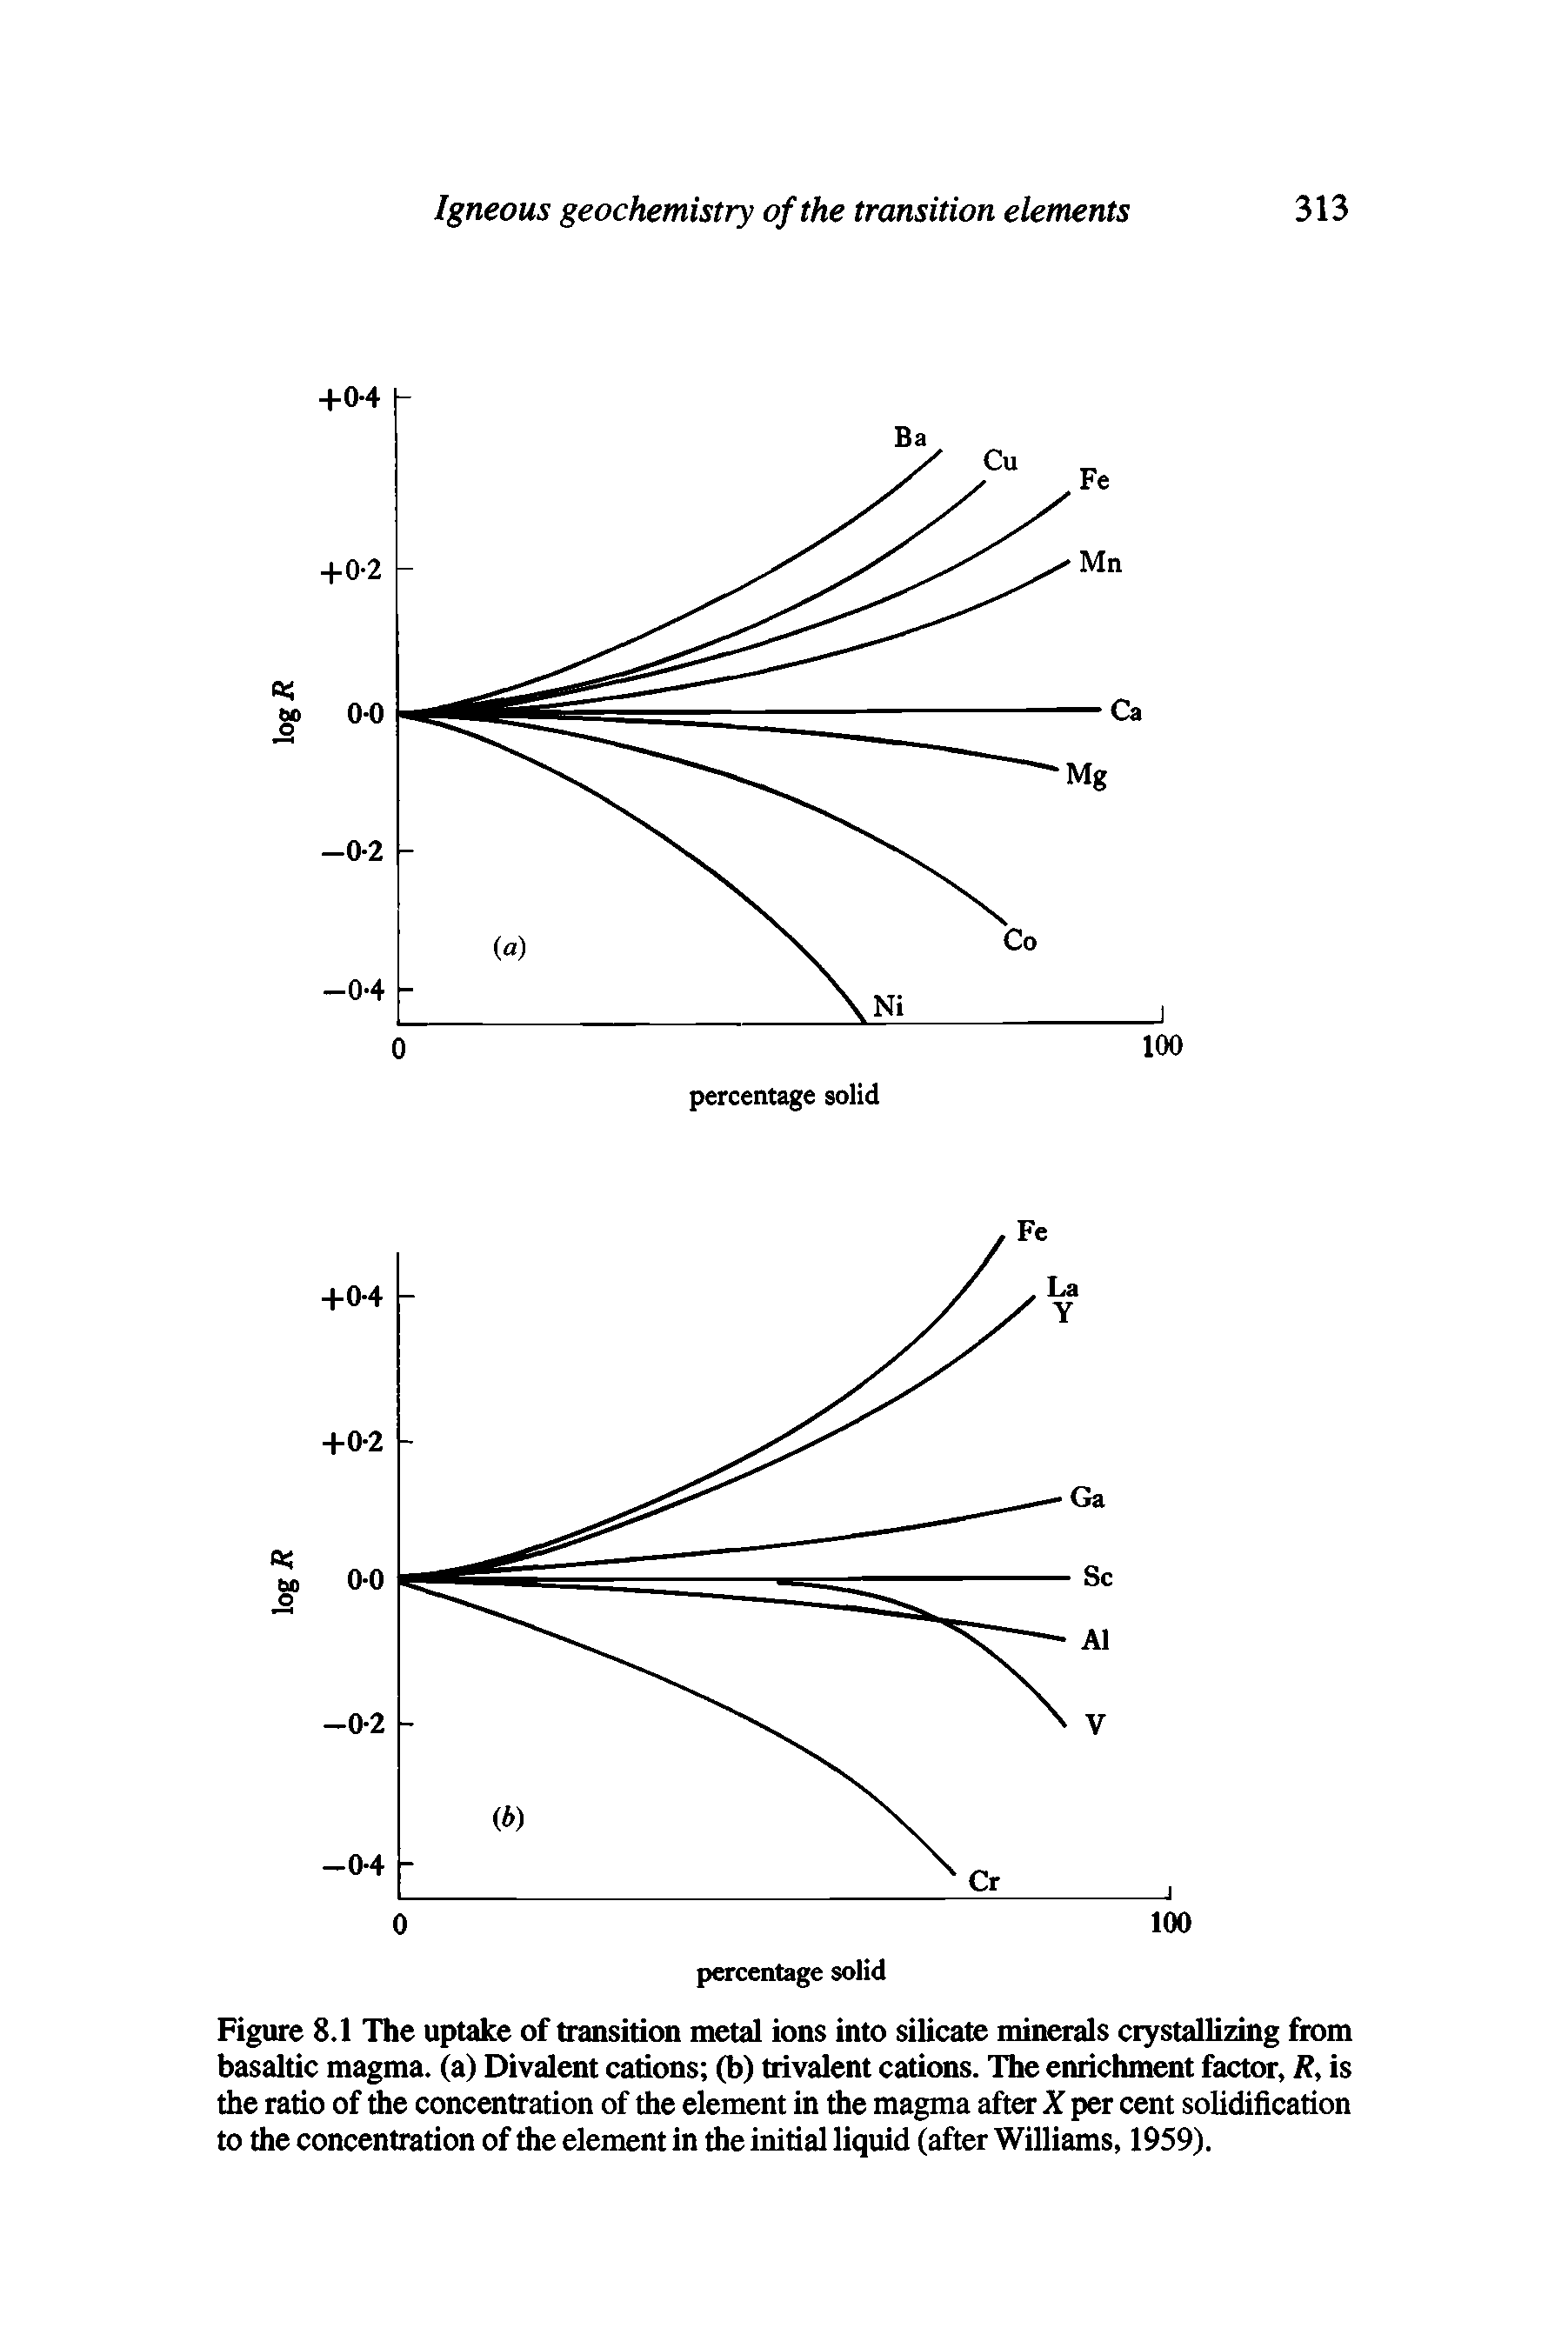 Figure 8.1 The uptake of transition metal ions into silicate minerals crystallizing from basaltic magma, (a) Divalent cations (b) trivalent cations. The enrichment factor, R, is the ratio of the concentration of the element in the magma after X per cent solidification to the concentration of the element in the initial liquid (after Williams, 1959).